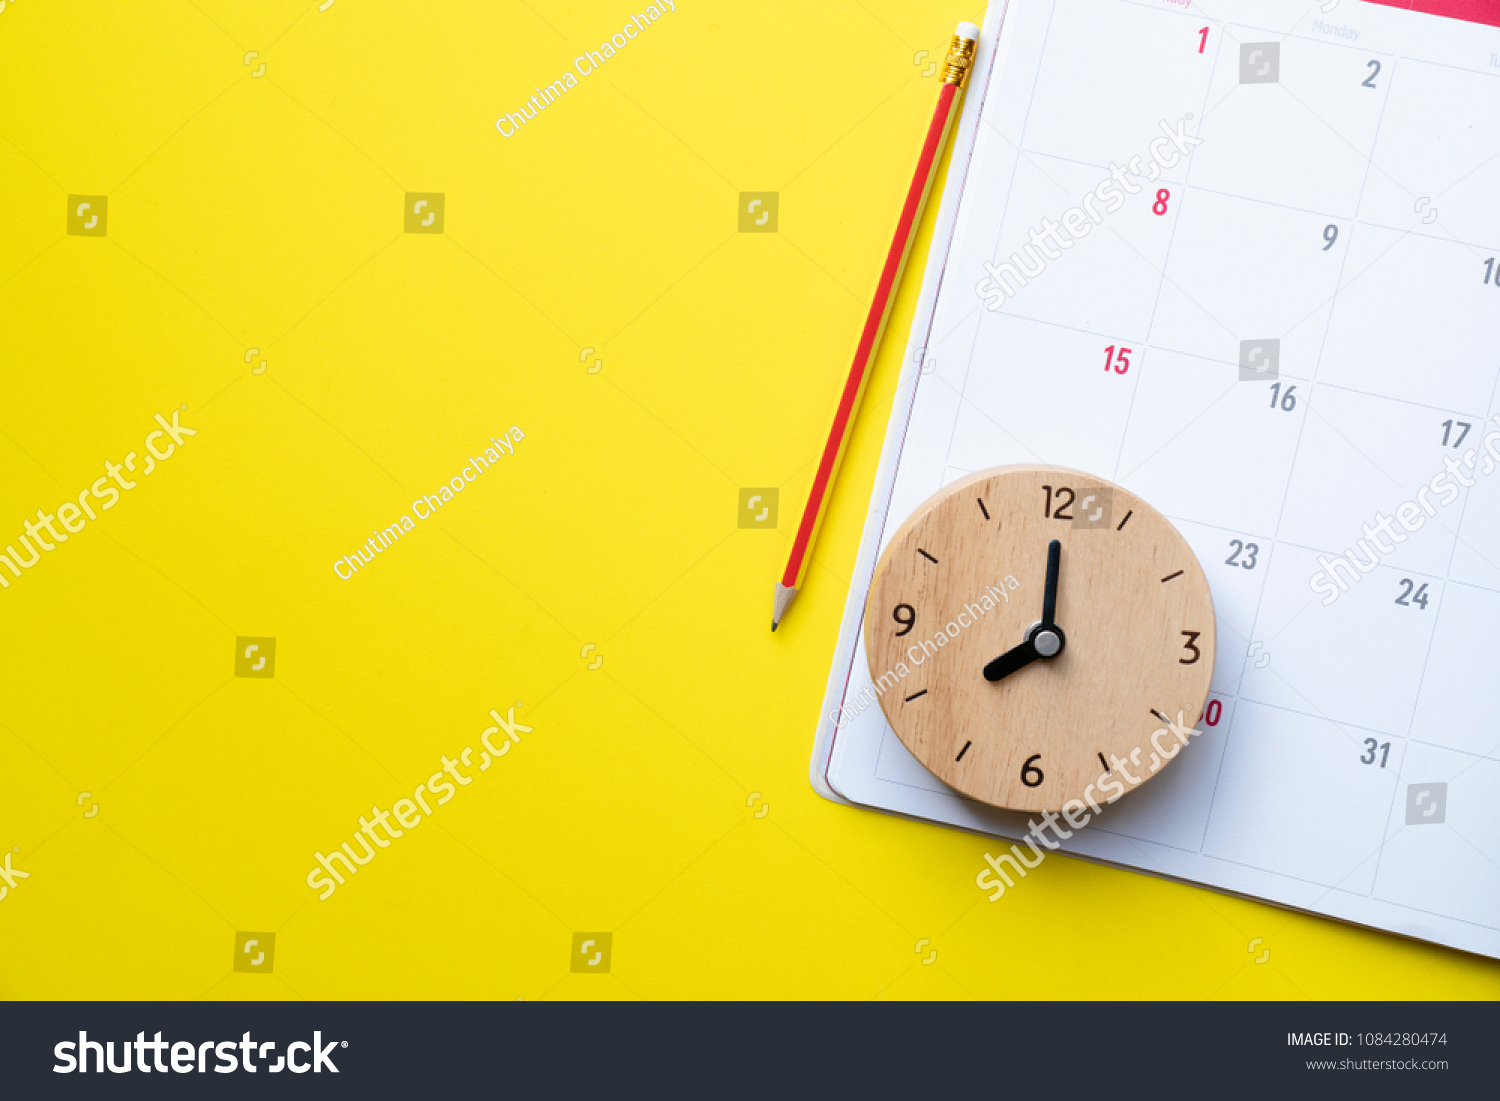 close up of calendar or monthly planner on the yellow background, planning for business meeting or travel planning concept #1084280474